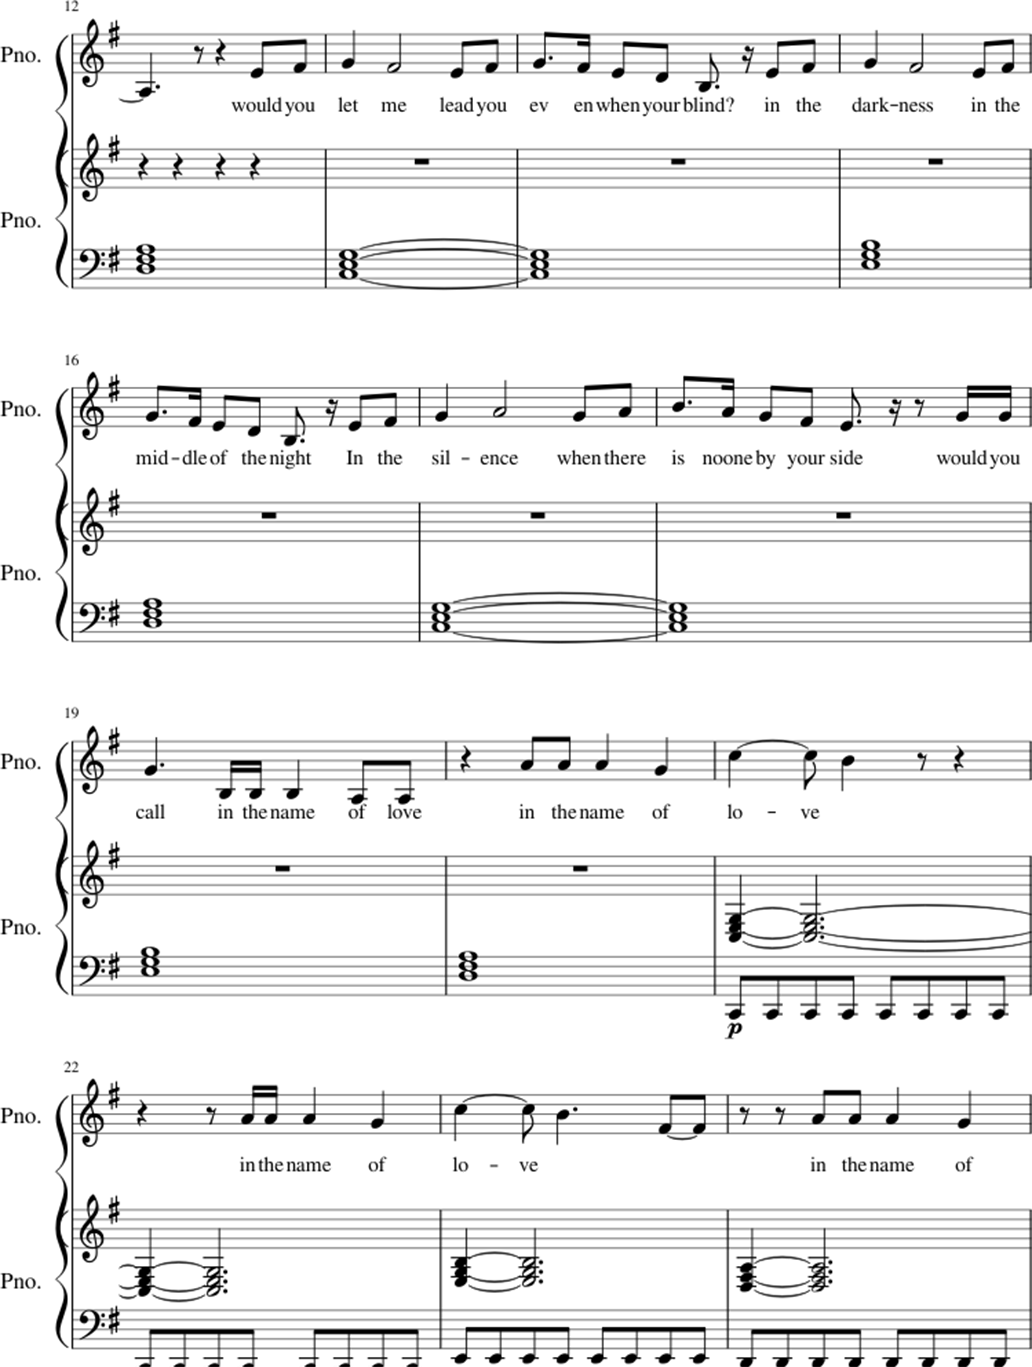 In the name of love sheet music notes 2